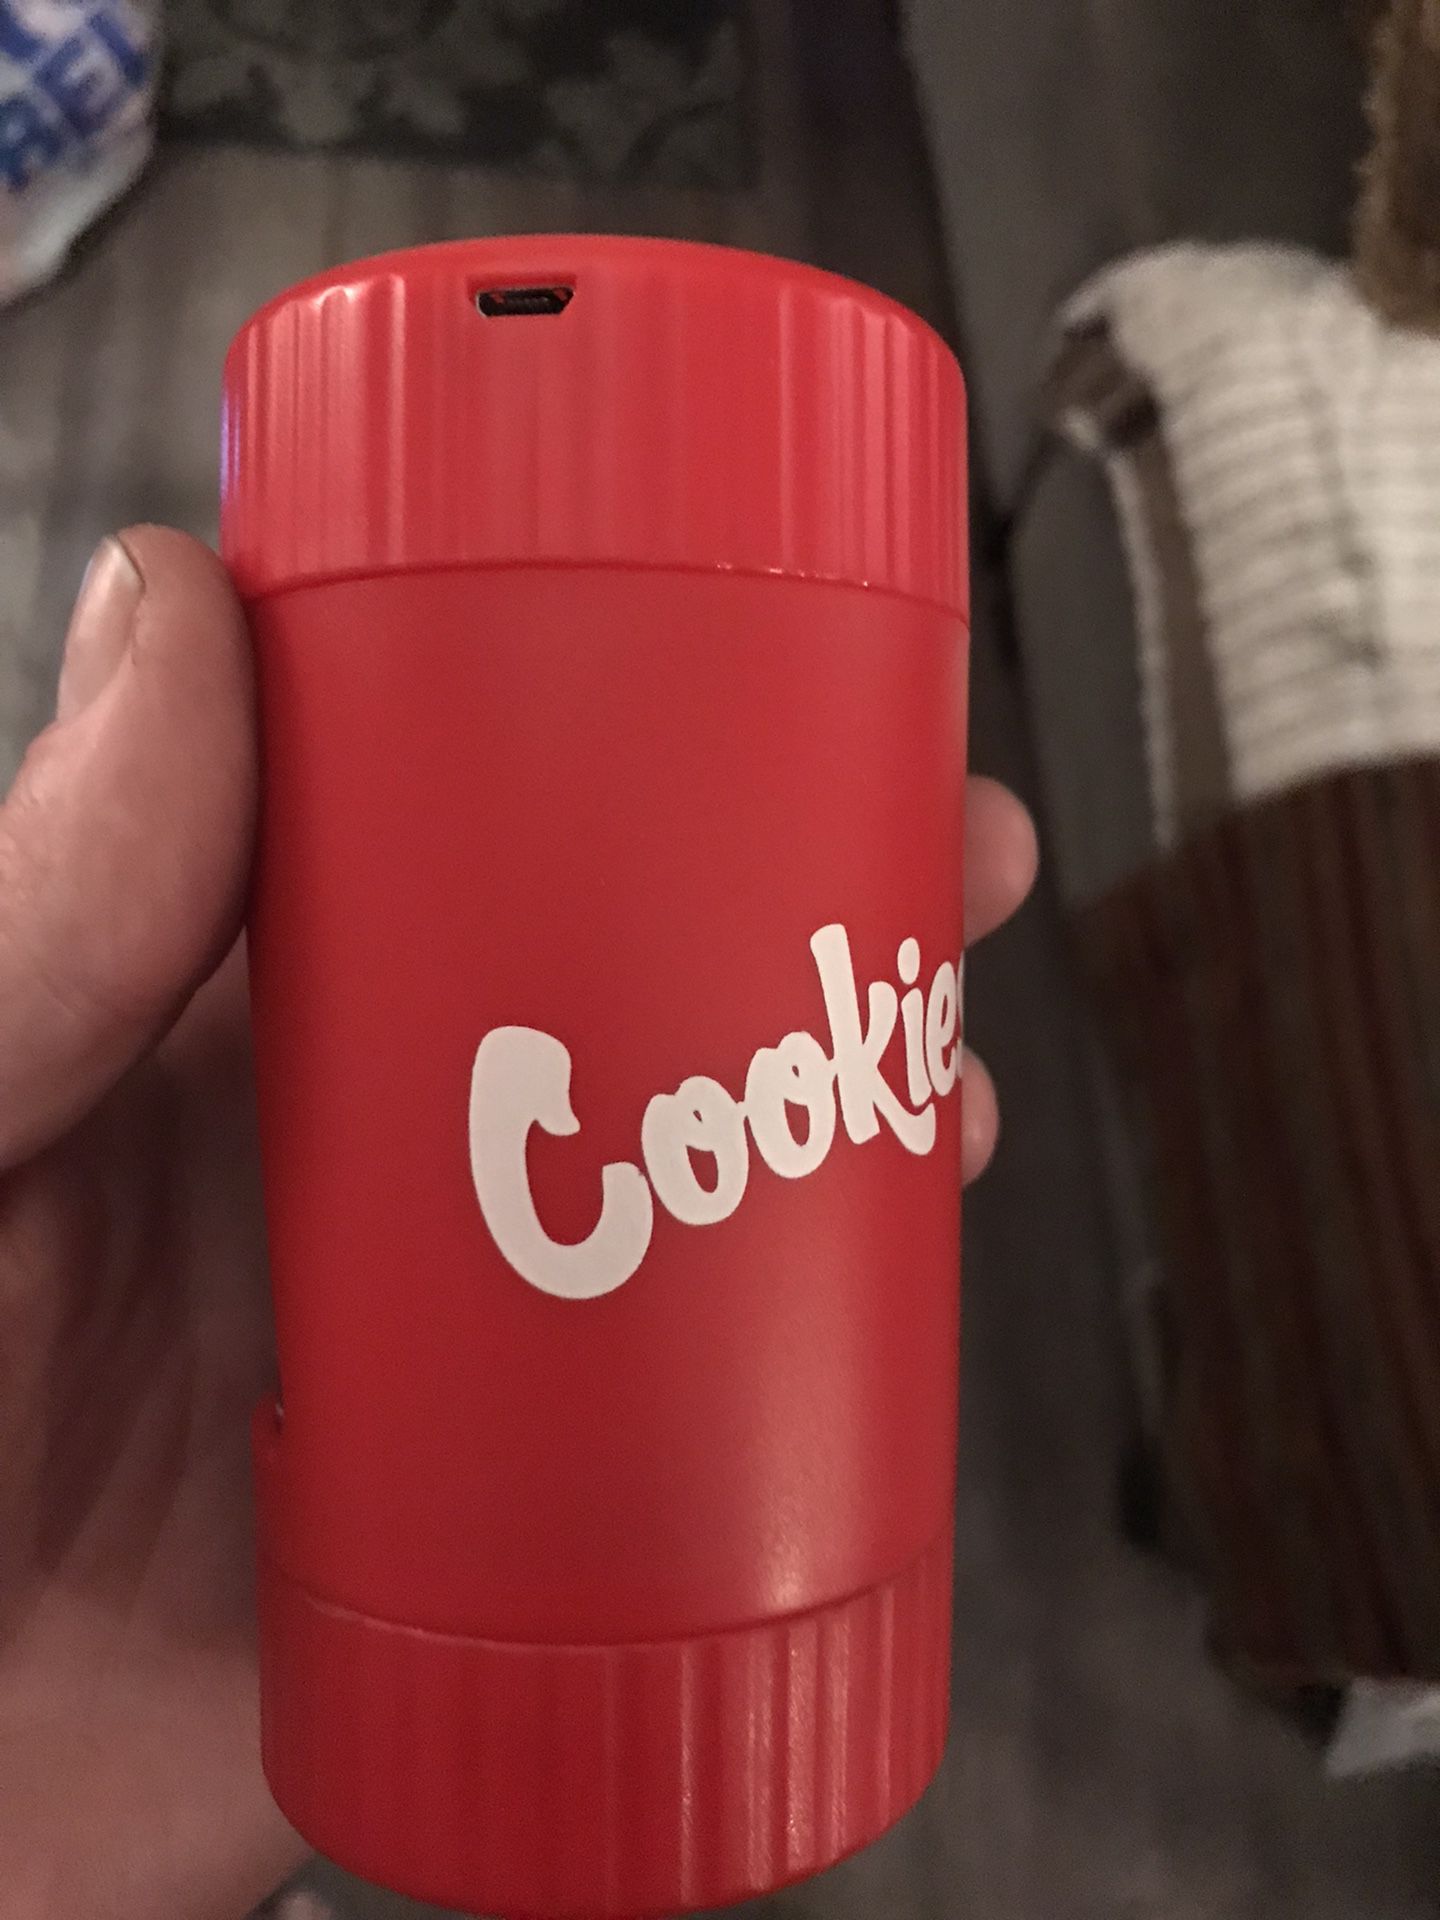 Cookies Bud Jar Has A Light,grinder On The Bottom ,&magnifying Glass On Top